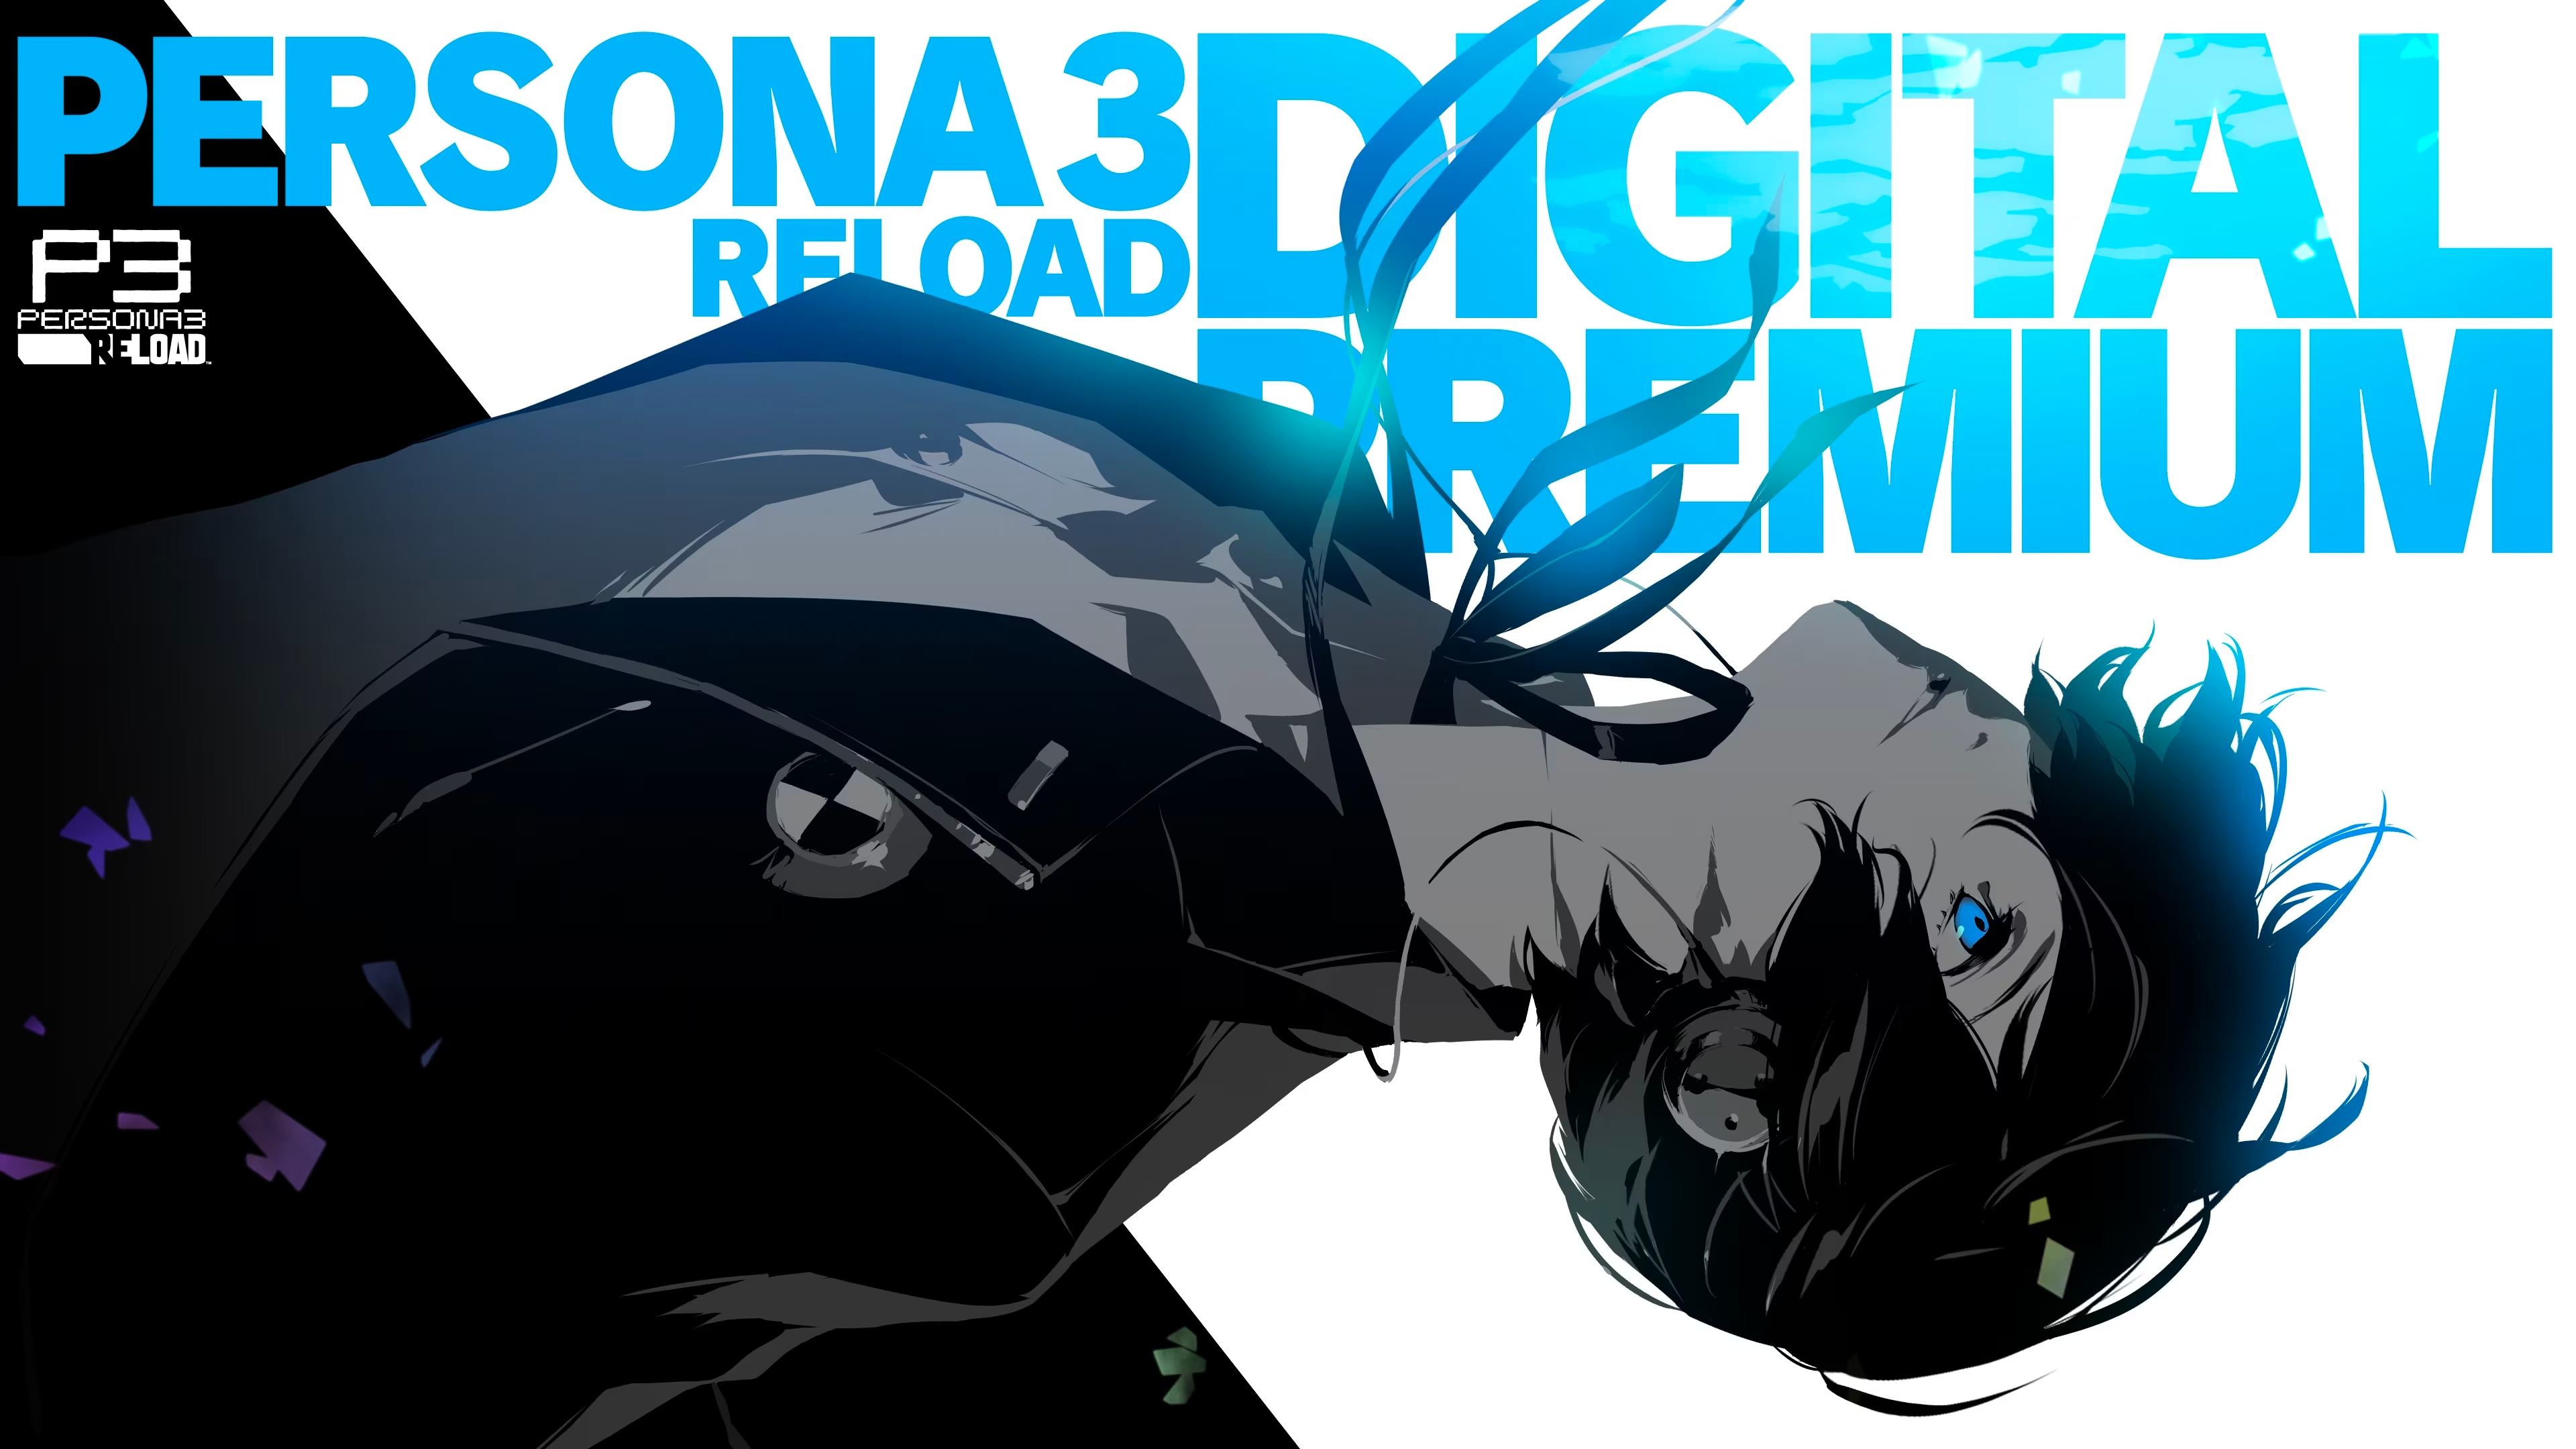 Persona 3 Reload review: close to perfect RPG remake - The Verge